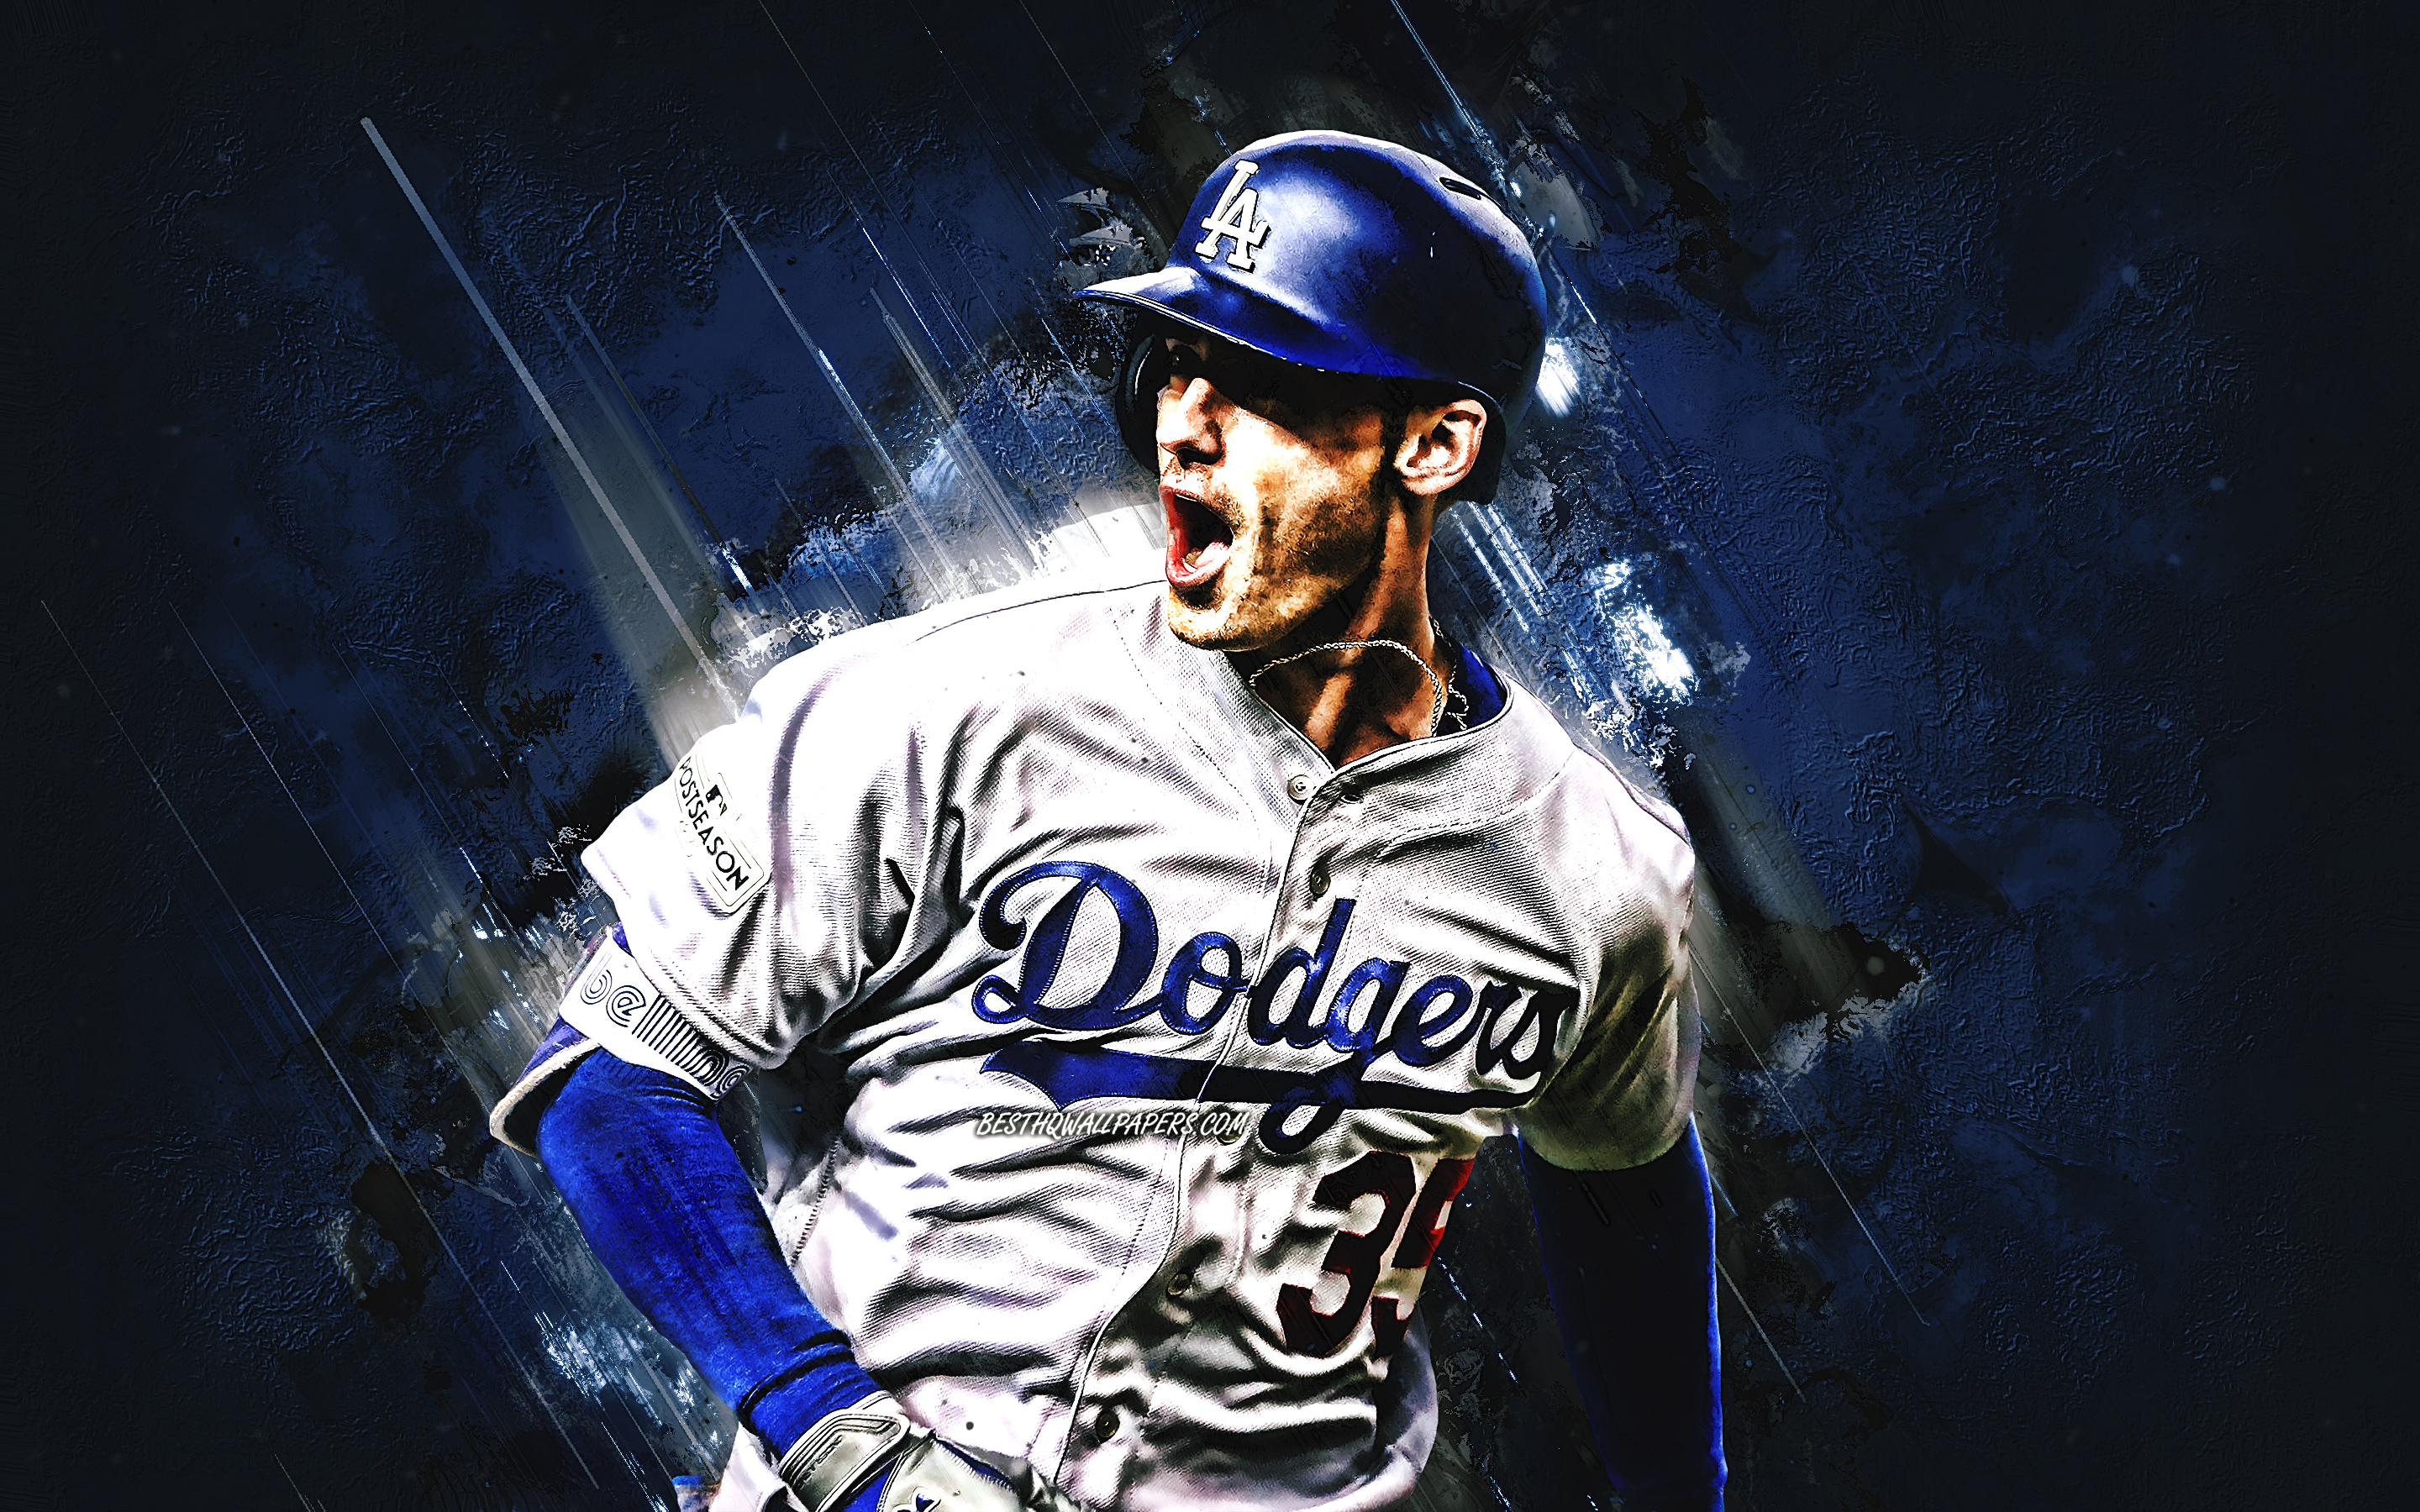 Mlb Player Wallpapers 76 images